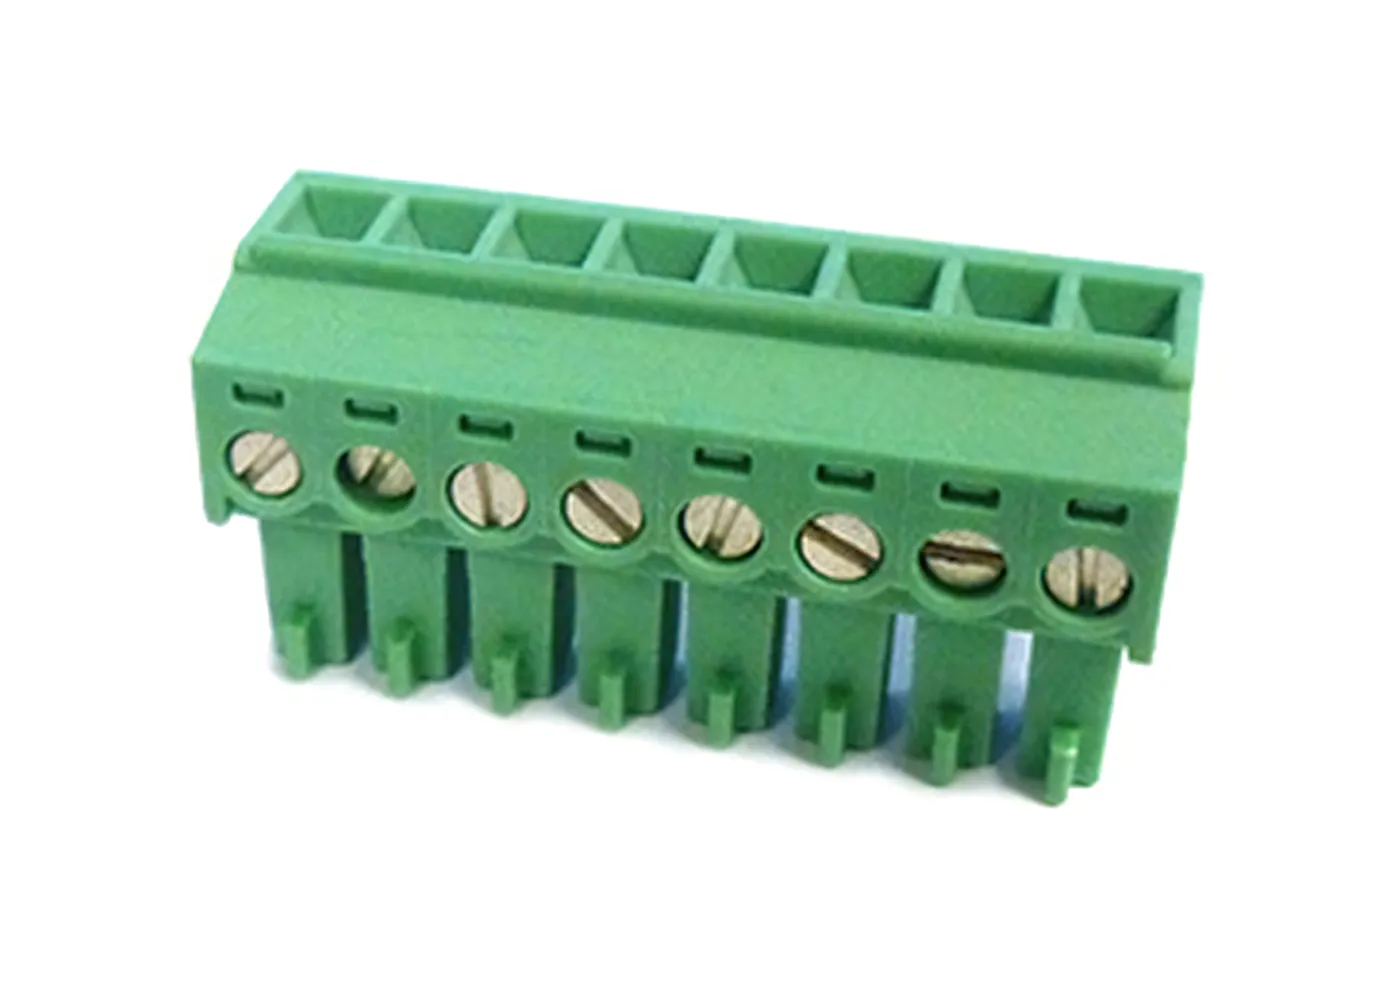 8 Position I/O Connector<br/>

<span class="clsSpnProdMdls">For HMI +PLC (HMCs) Only</span>